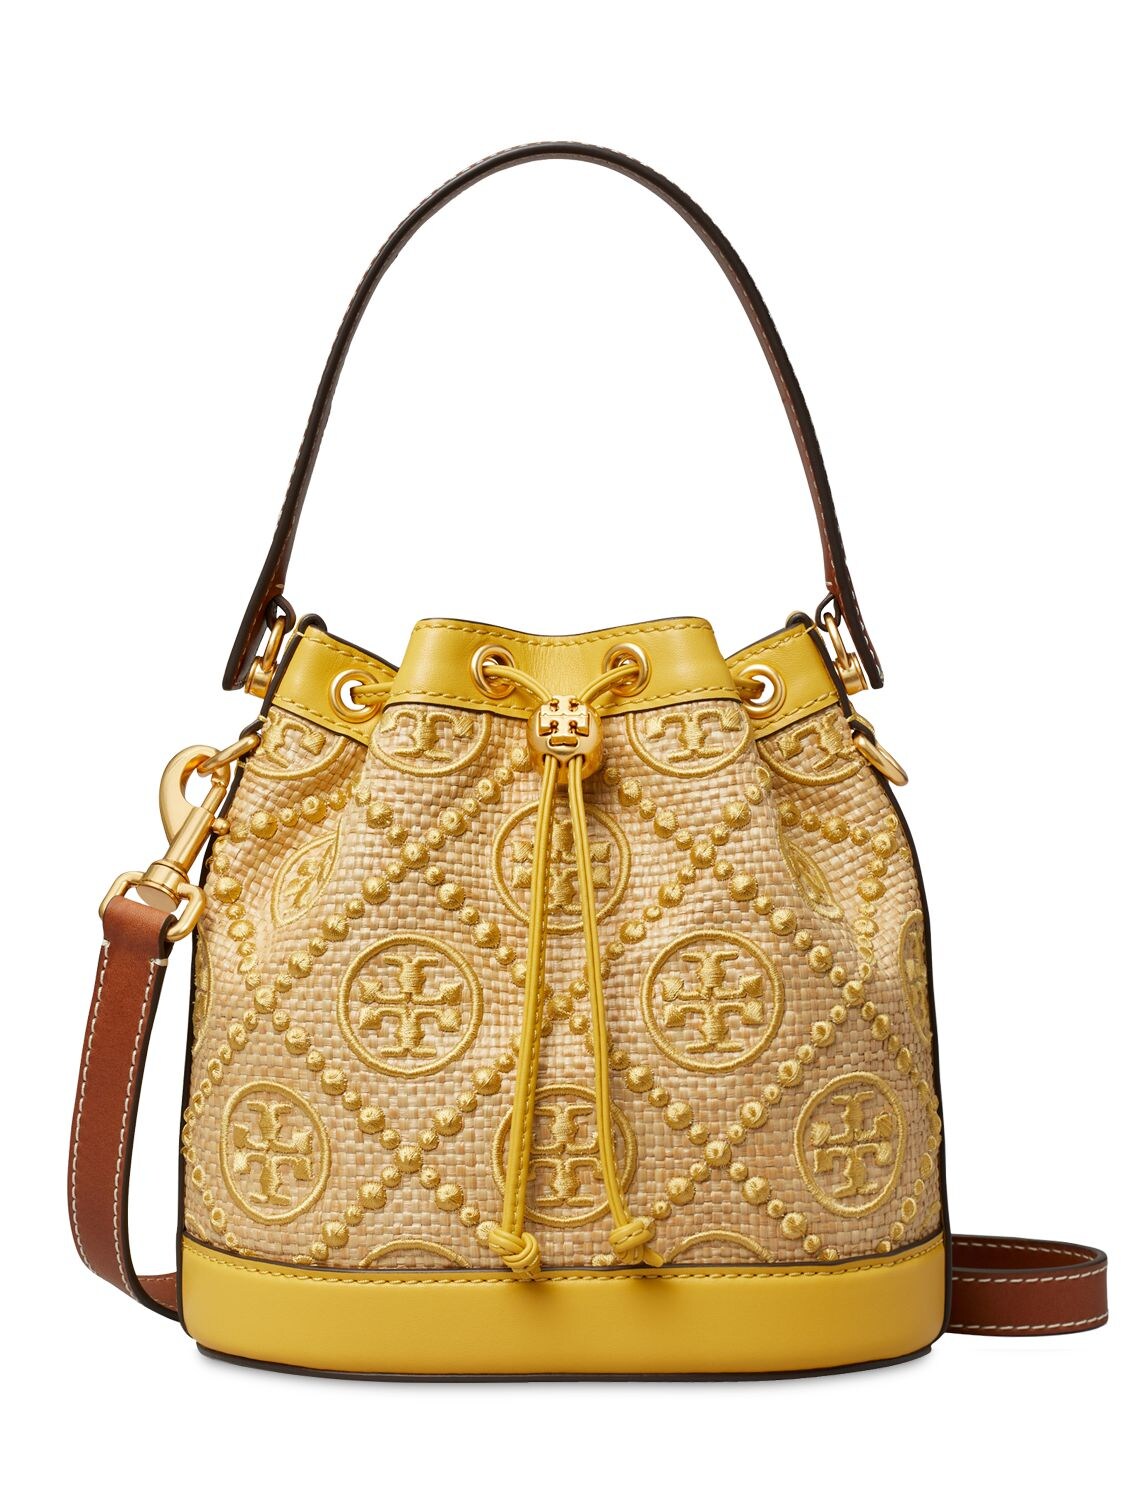 Tory Burch Gold Thea Leather Bucket Bag, Best Price and Reviews